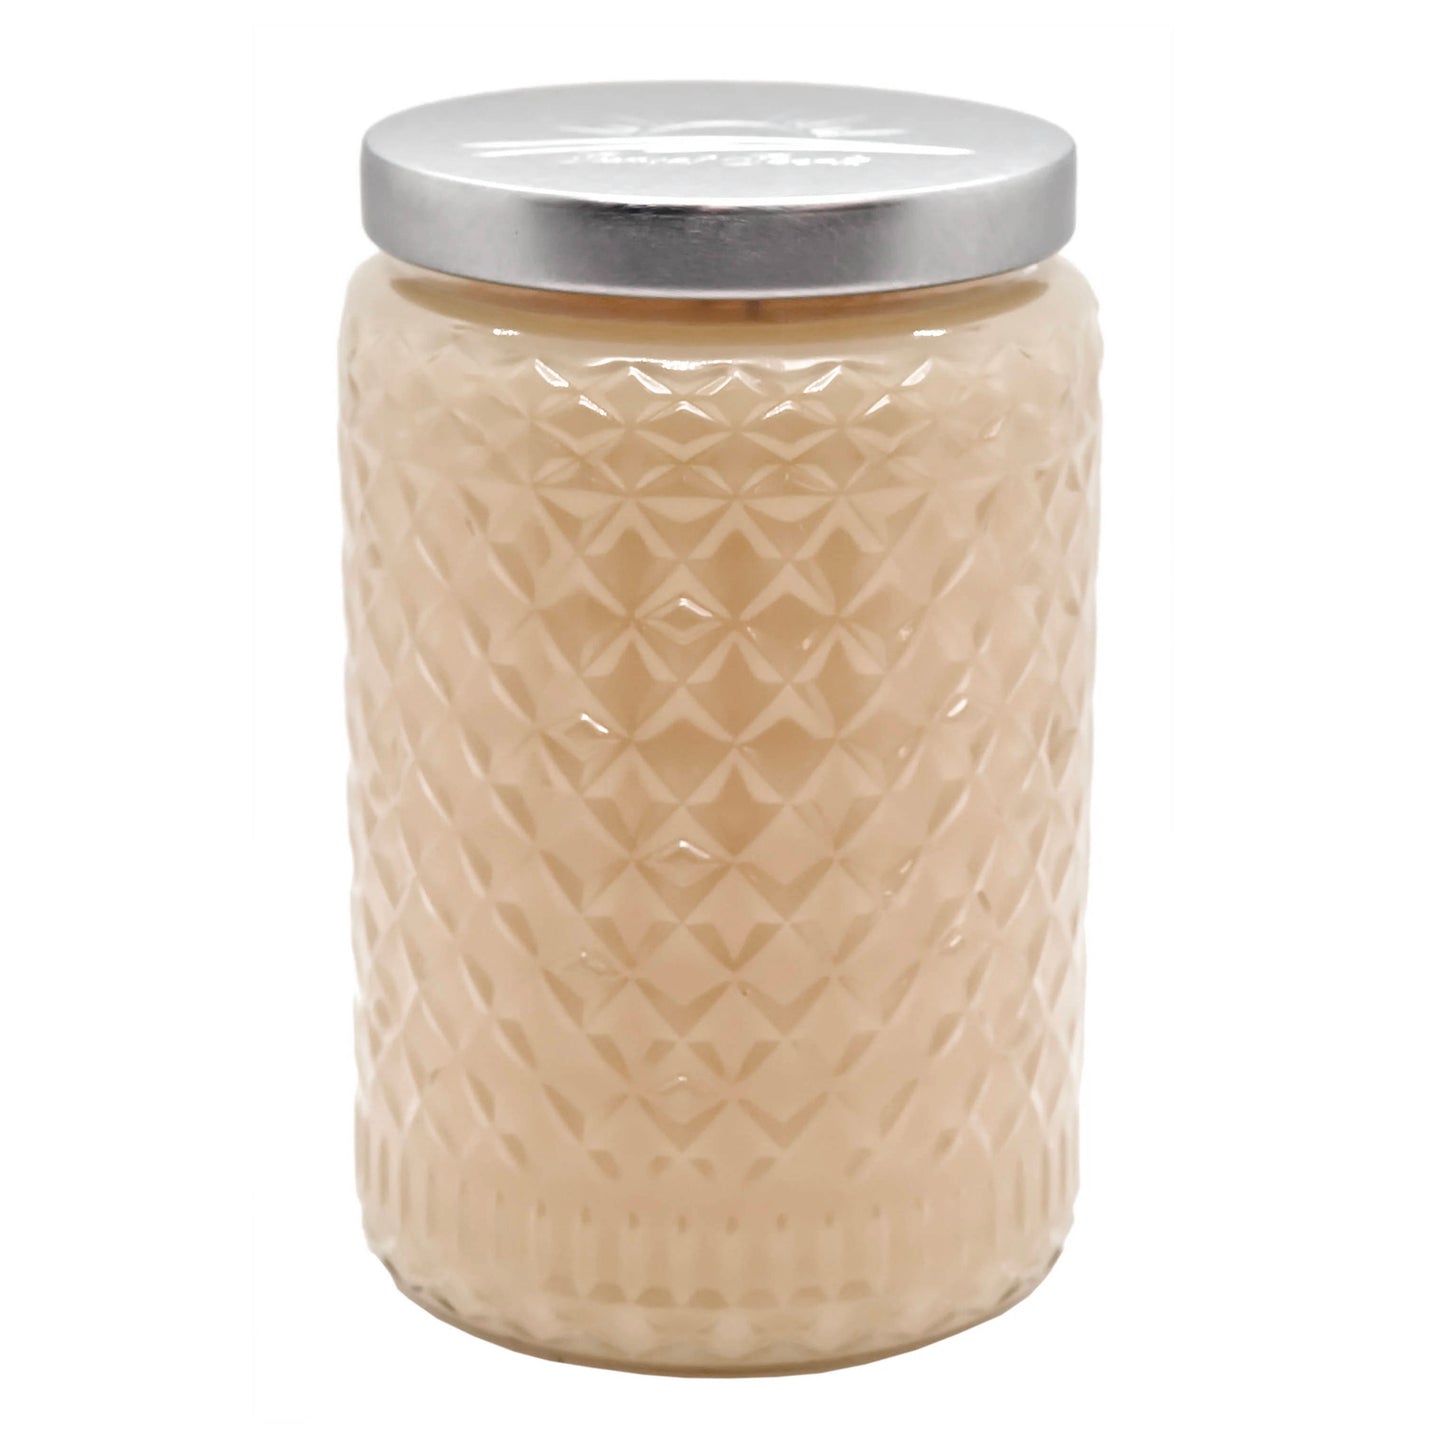 Cozy Cabin Scented Candle 24oz